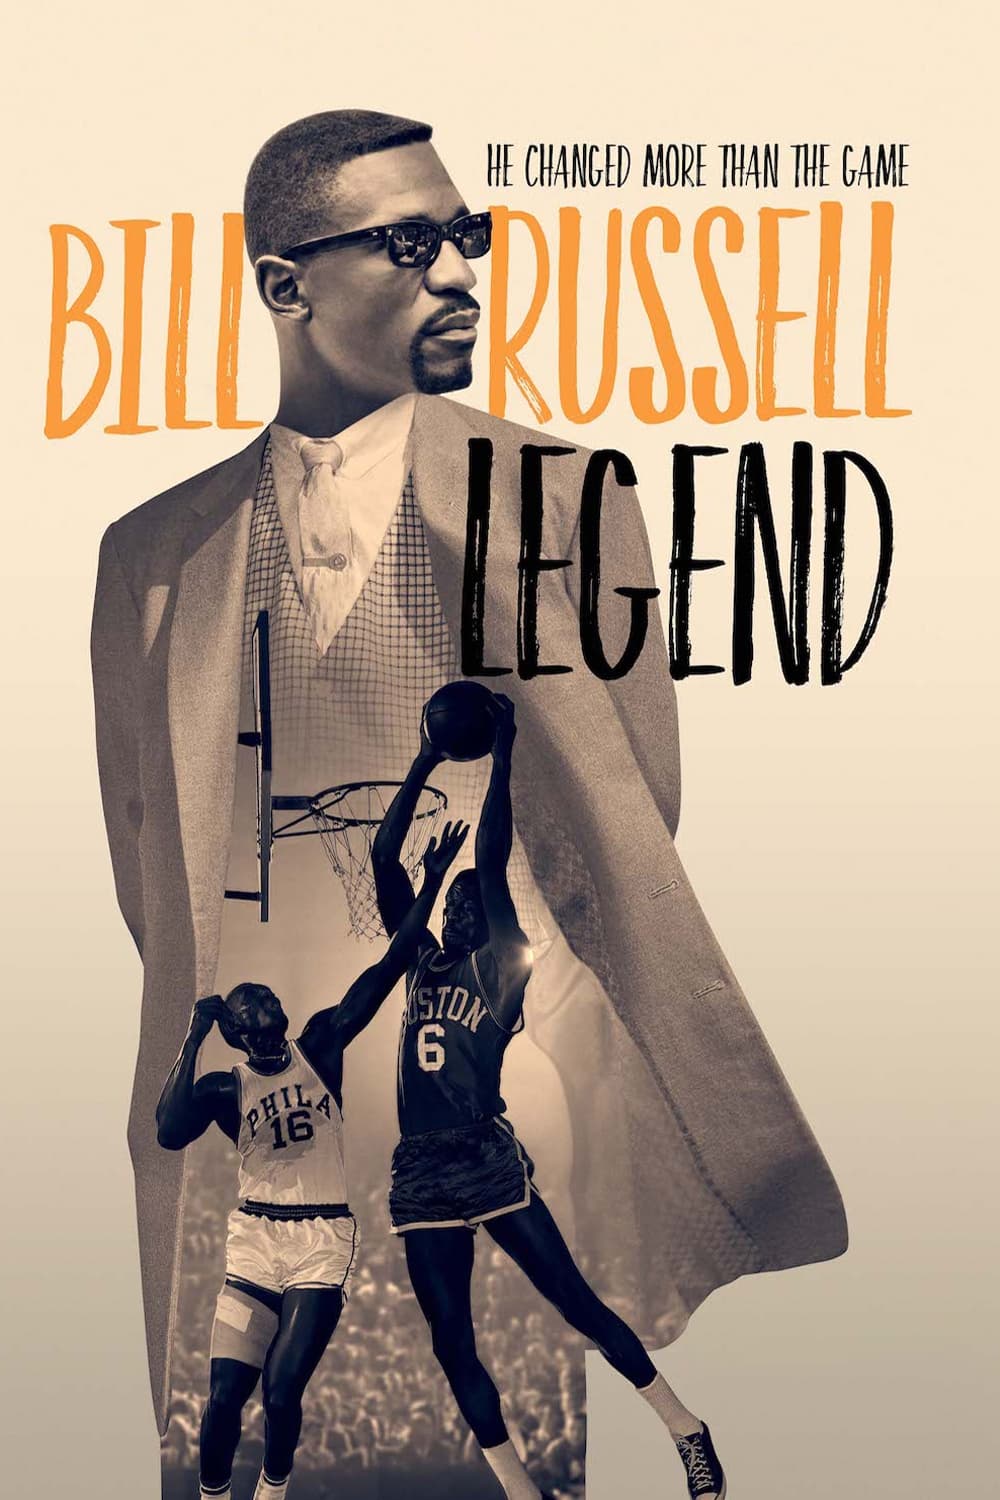 Bill Russell: Legend TV Shows About Activism